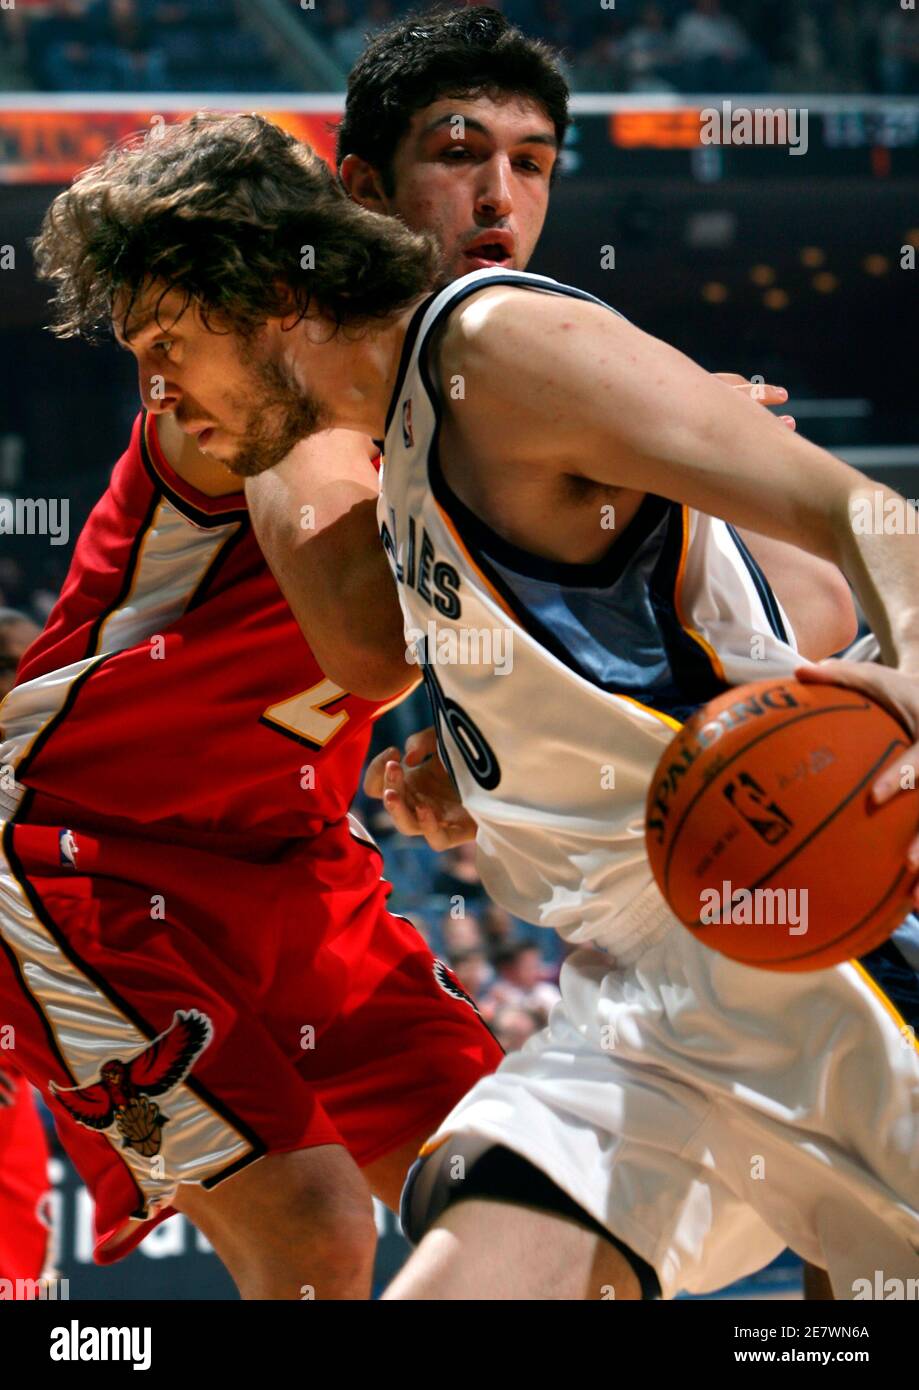 Memphis Grizzlies forward Pau Gasol of Spain (16) drives along the baseline  defended by Atlanta Hawks center Zaza Pachulia of Georgia during the first  quarter of NBA basketball action in Memphis, Tennessee,